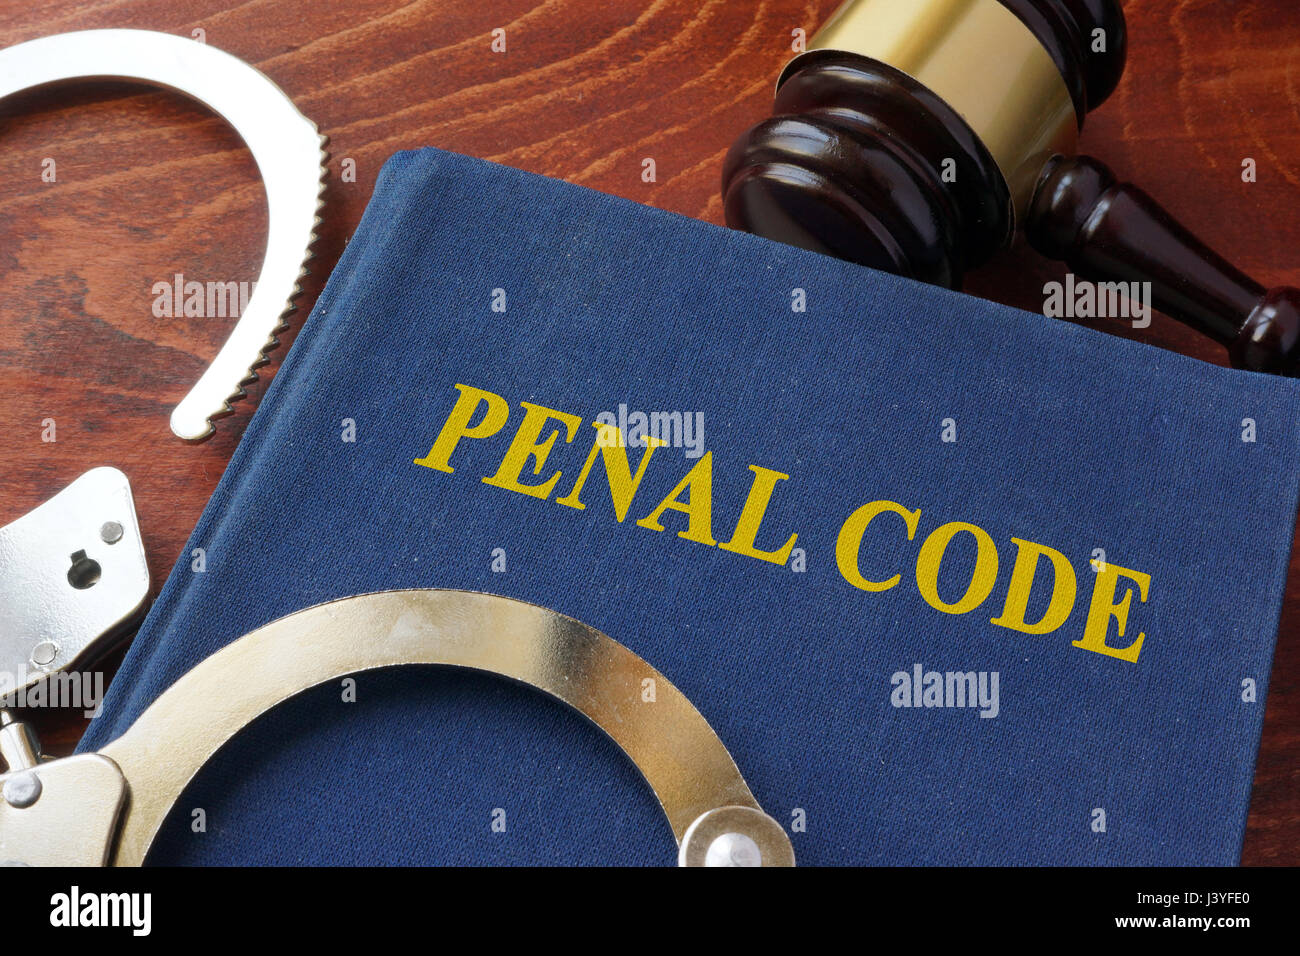 Cuffs and book with the title Penal code. Criminal law concept. Stock Photo